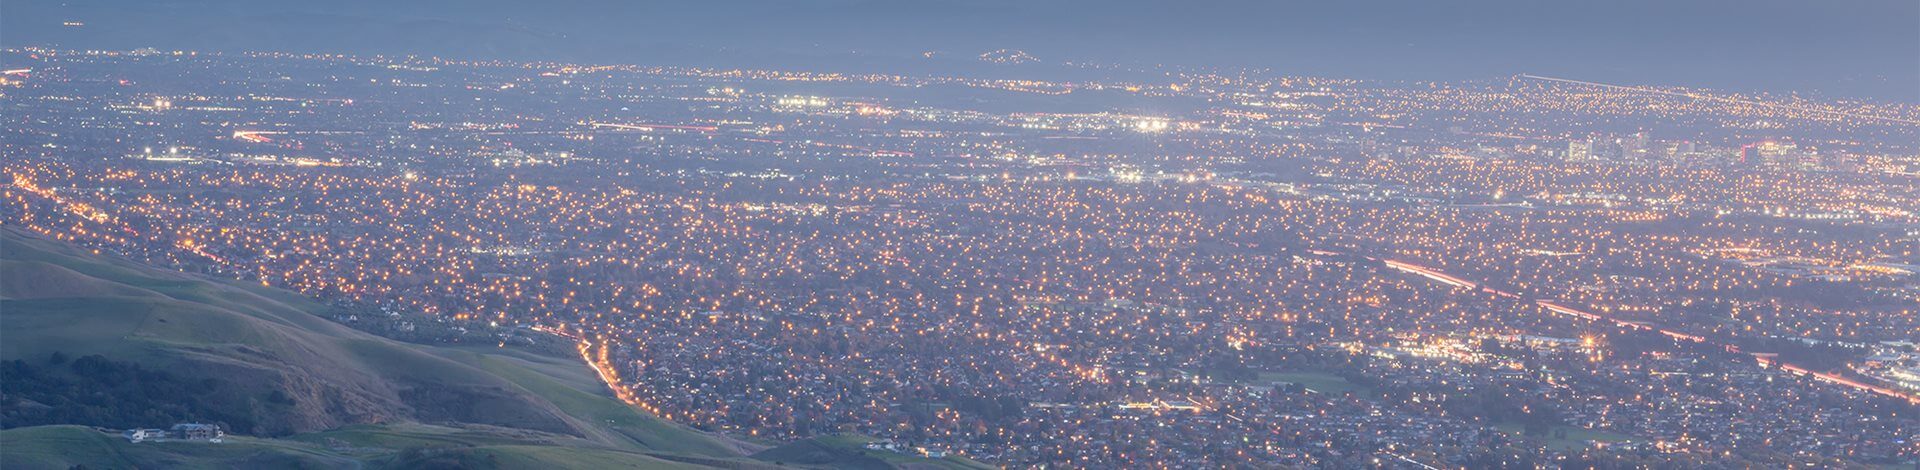 View over Silicon Valley from hill at dusk